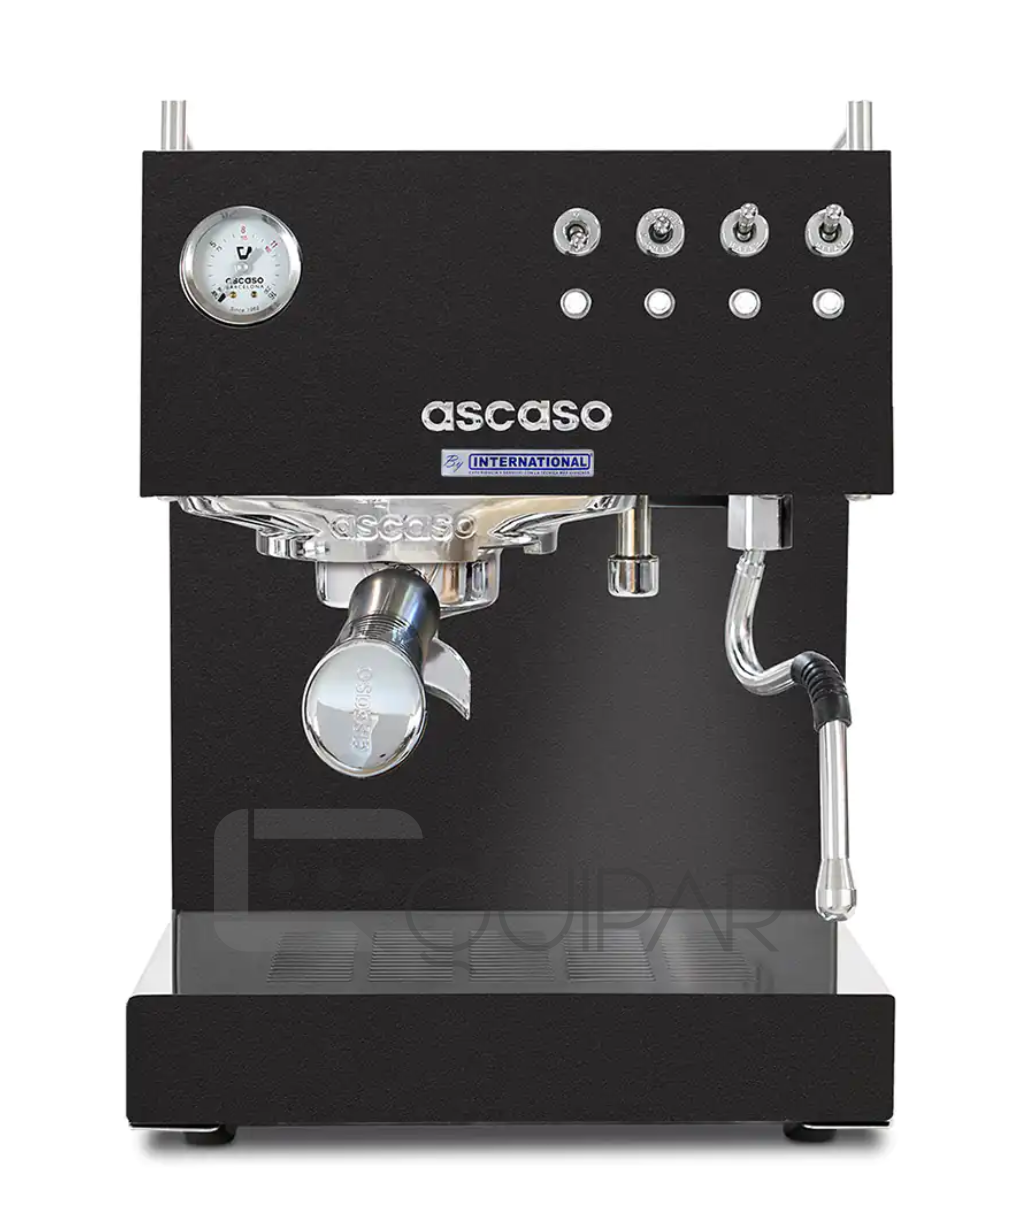 CAFETERA DUO PROF ASCASO DUO115N